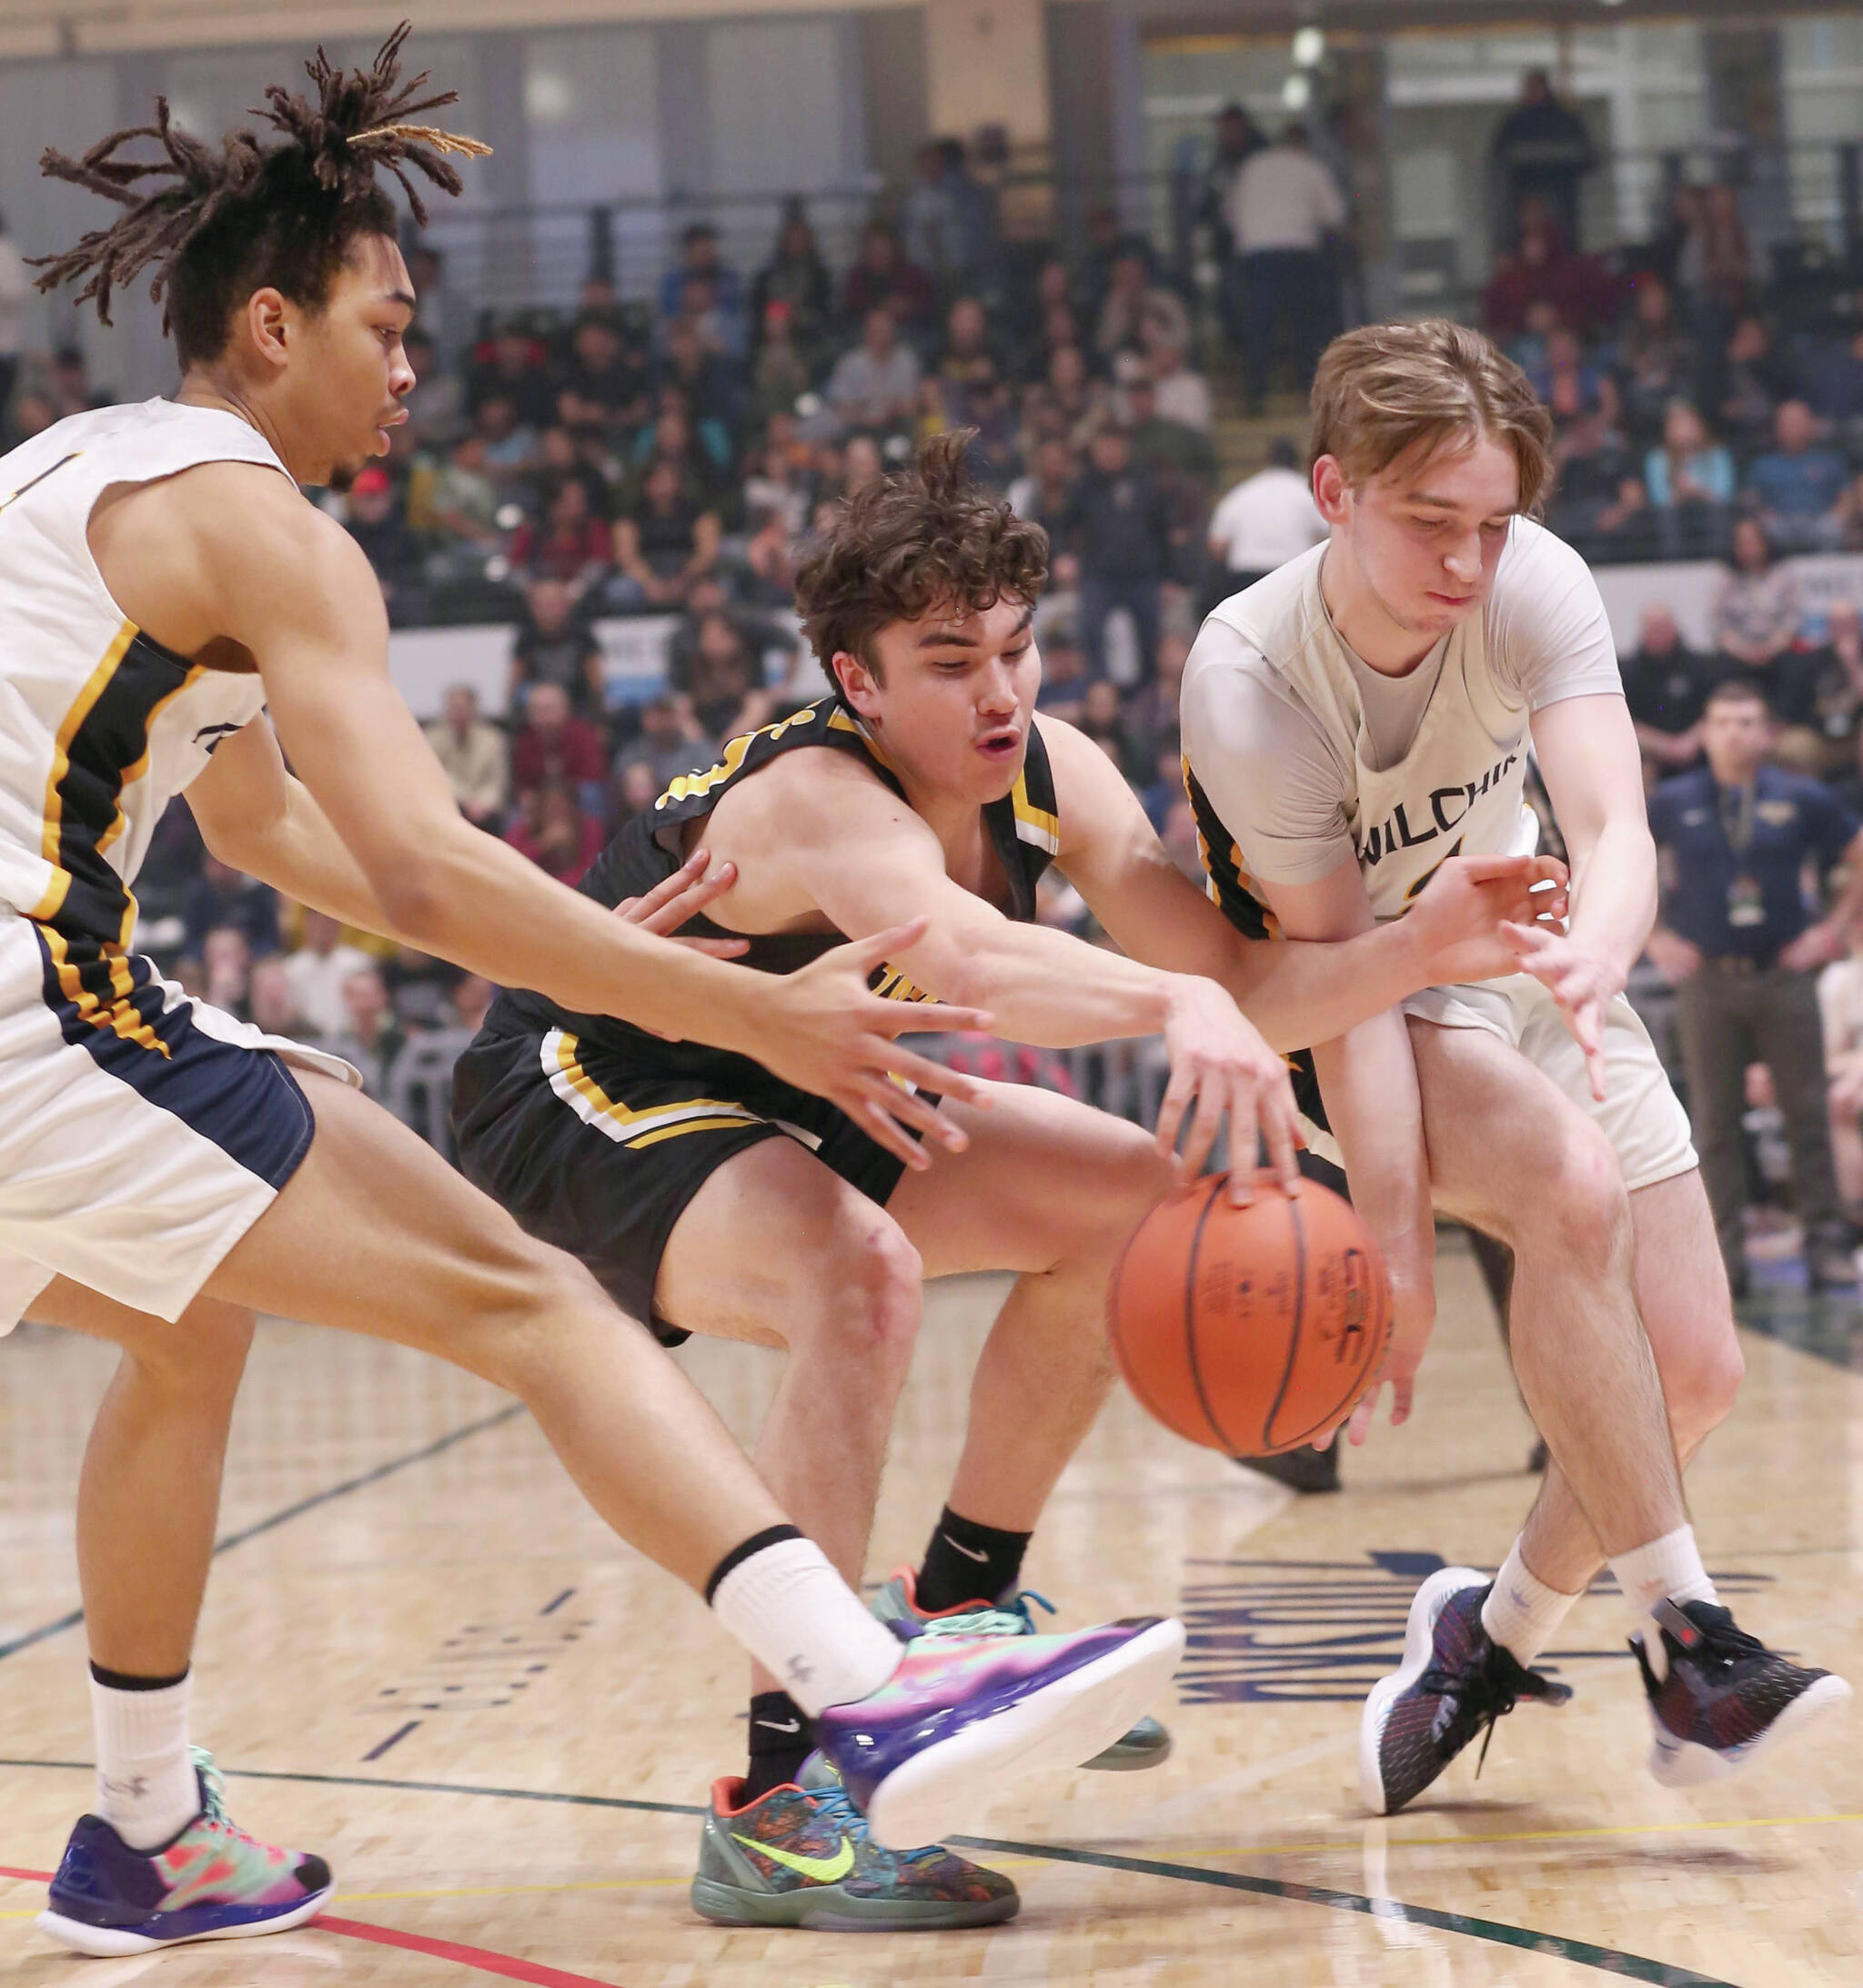 Ninilchik’s Jaylin Scott and Peyton Edens and Aqquilluk Hank of Tikigaq battle for the ball in the Class 2A boys state championship game Saturday, March 18, 2023, at the Alaska Airlines Center in Anchorage, Alaska. (Photo courtesy of Robin Moore)